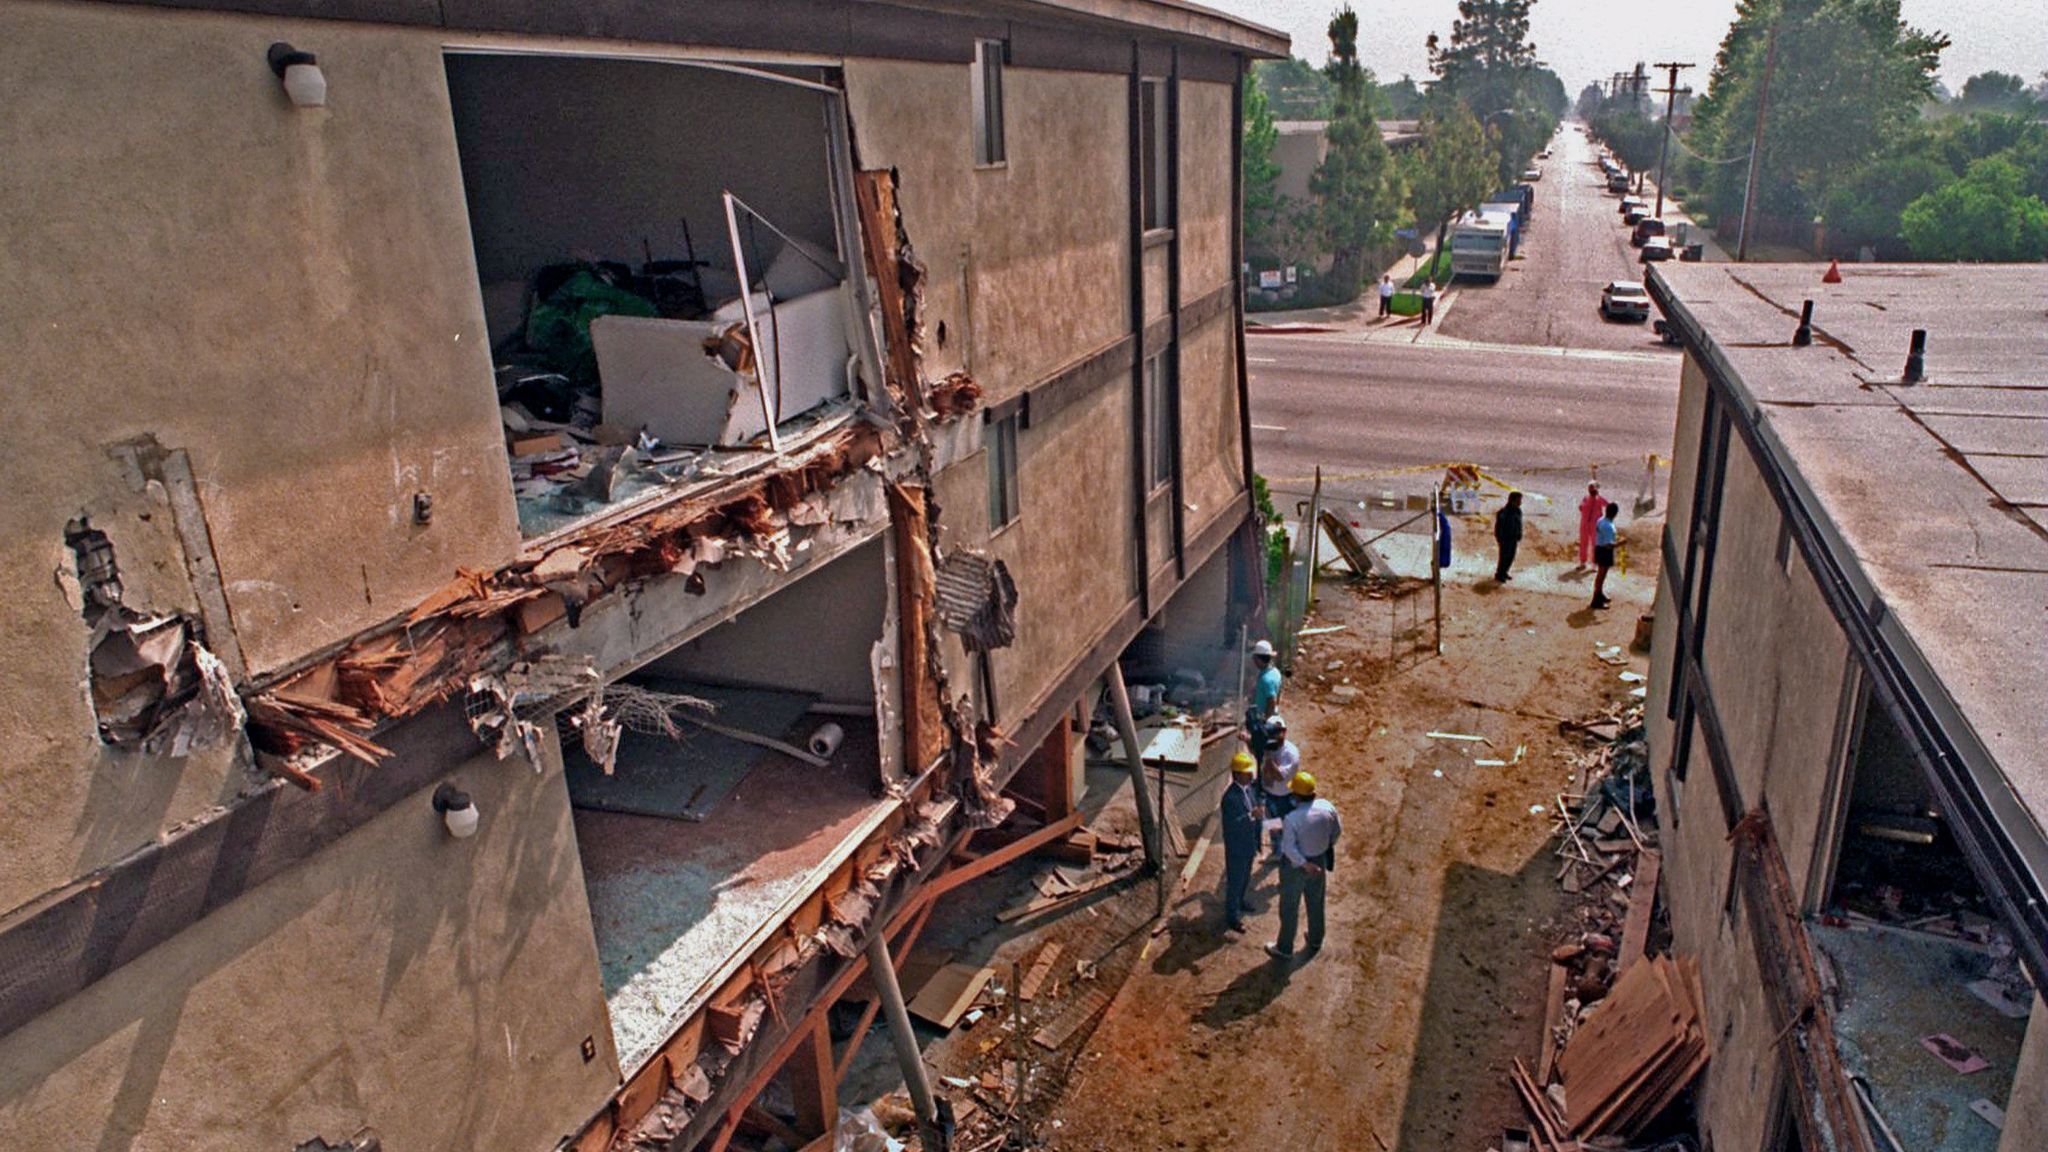 Workers begin to demolish the Northridge Meadows apartment building, whose ground floor collapsed in the 1994 earthquake.